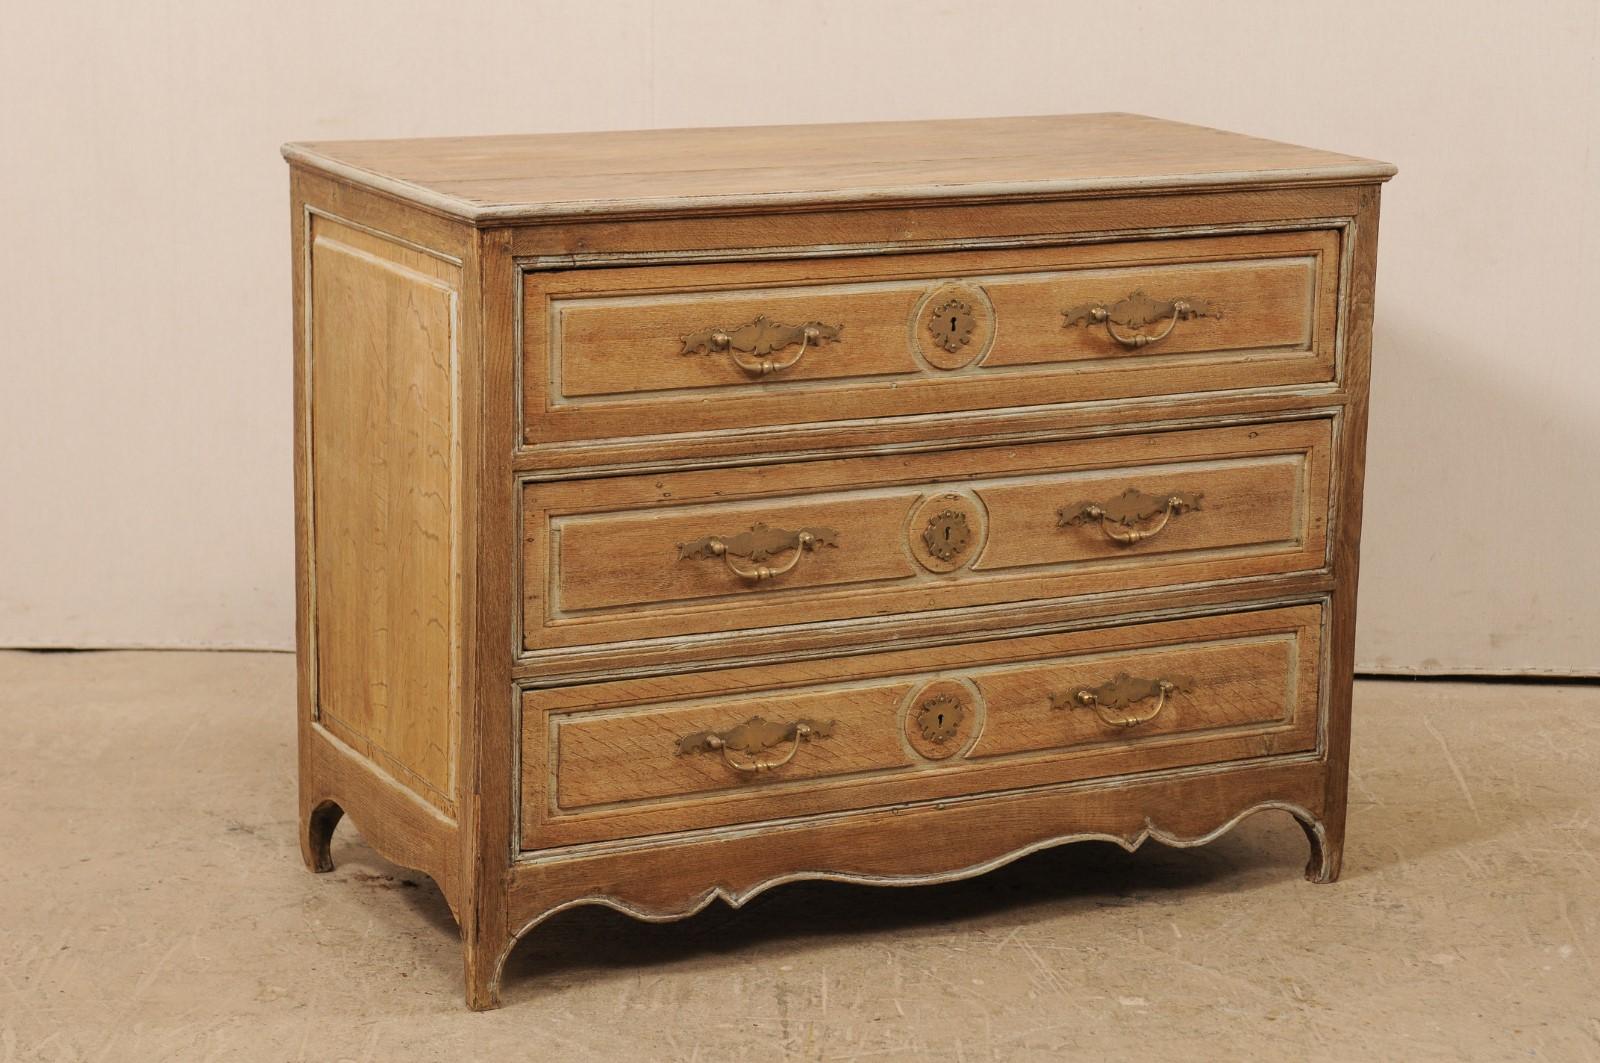 A French carved wood chest from the early 19th century. This antique commode from France features three decoratively paneled drawers with circular plaque carved at centre, single paneled sides, and scalloped skirt which flows down onto the slender